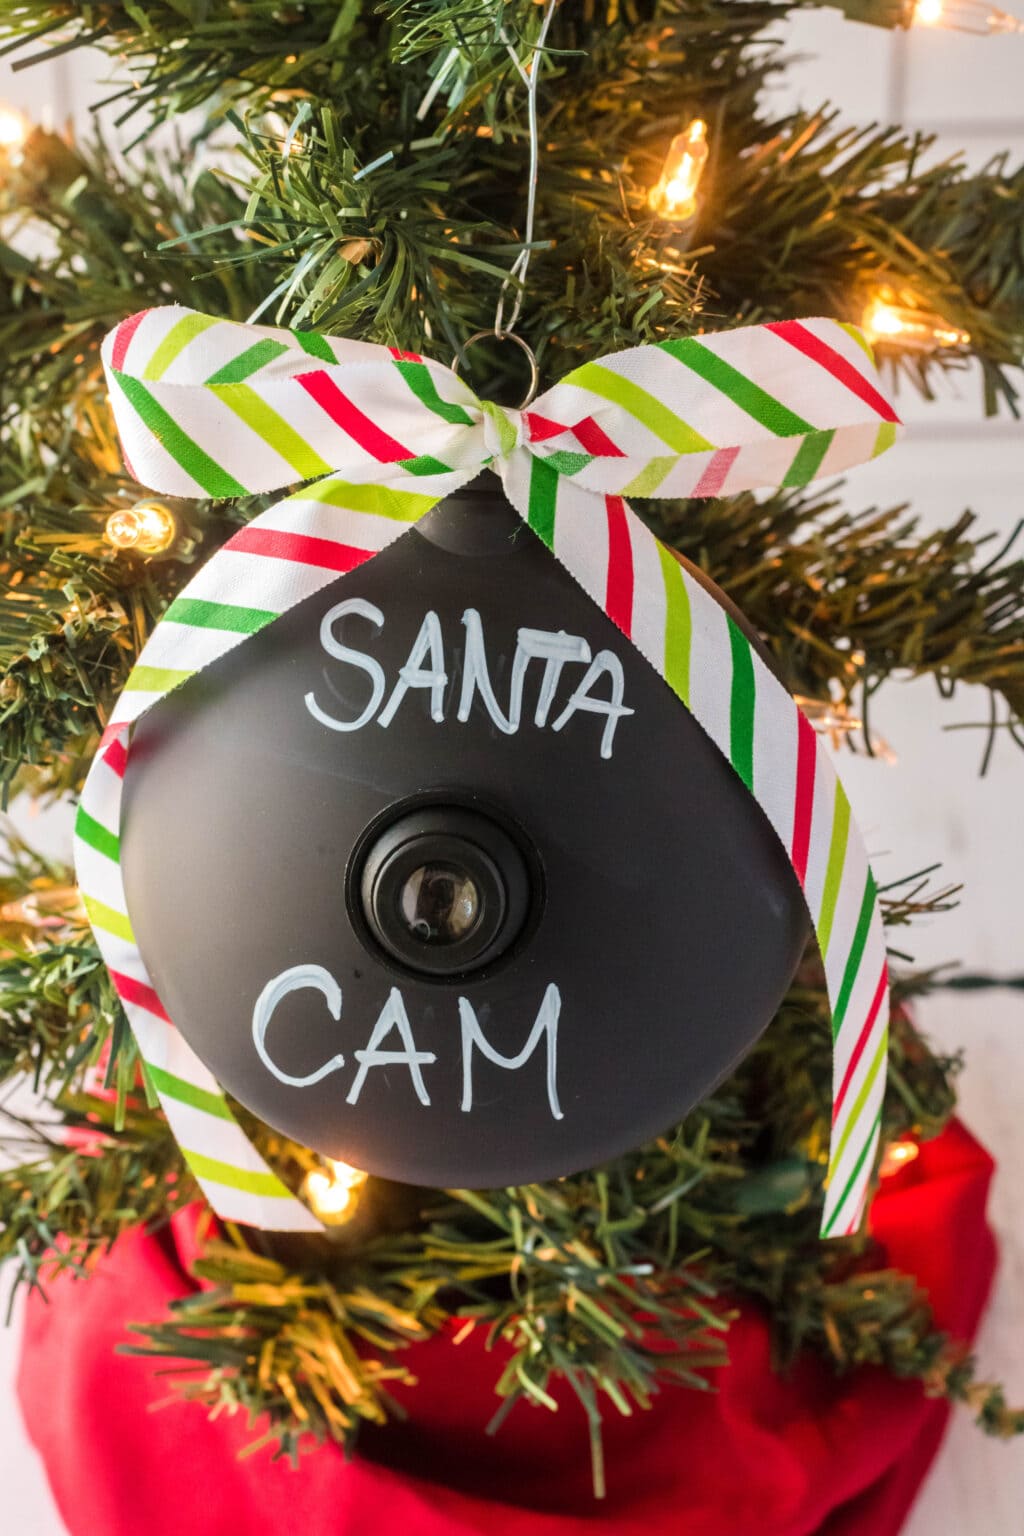 Chalkboard ornament with Santa Cam saying on it